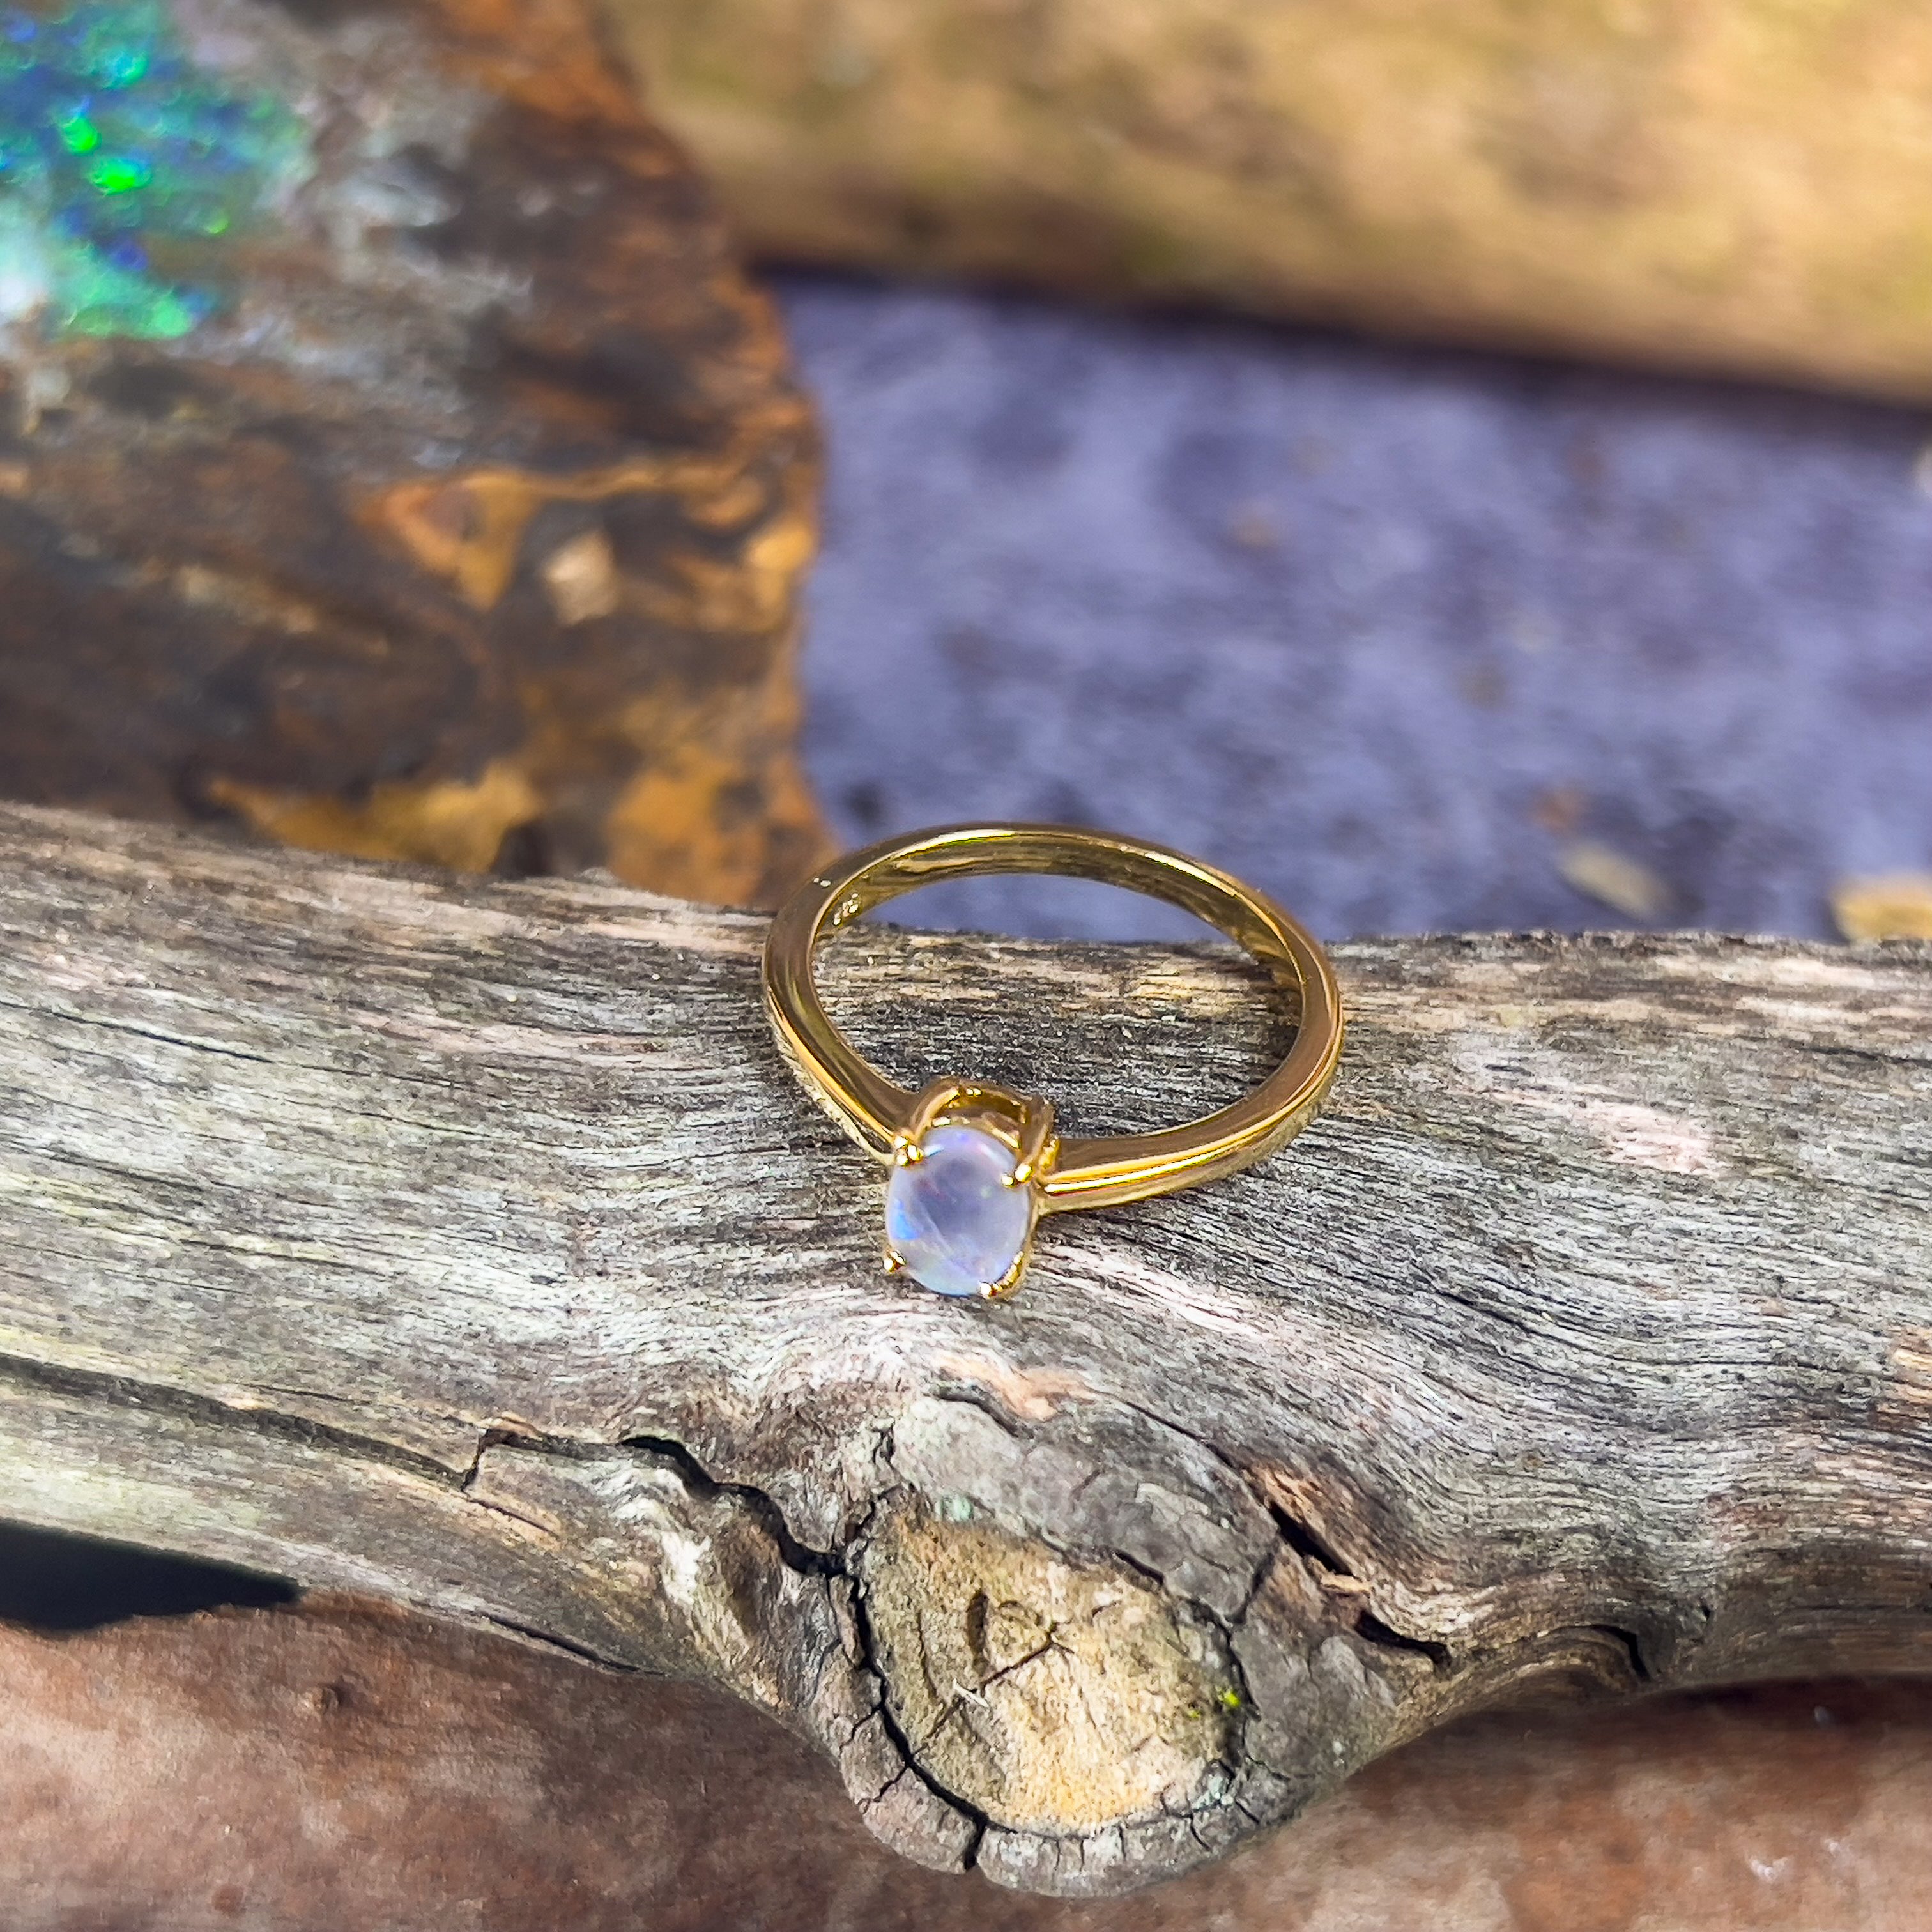 Gold plated sterling silver solitaire 7x5mm Black Opal ring - Masterpiece Jewellery Opal & Gems Sydney Australia | Online Shop